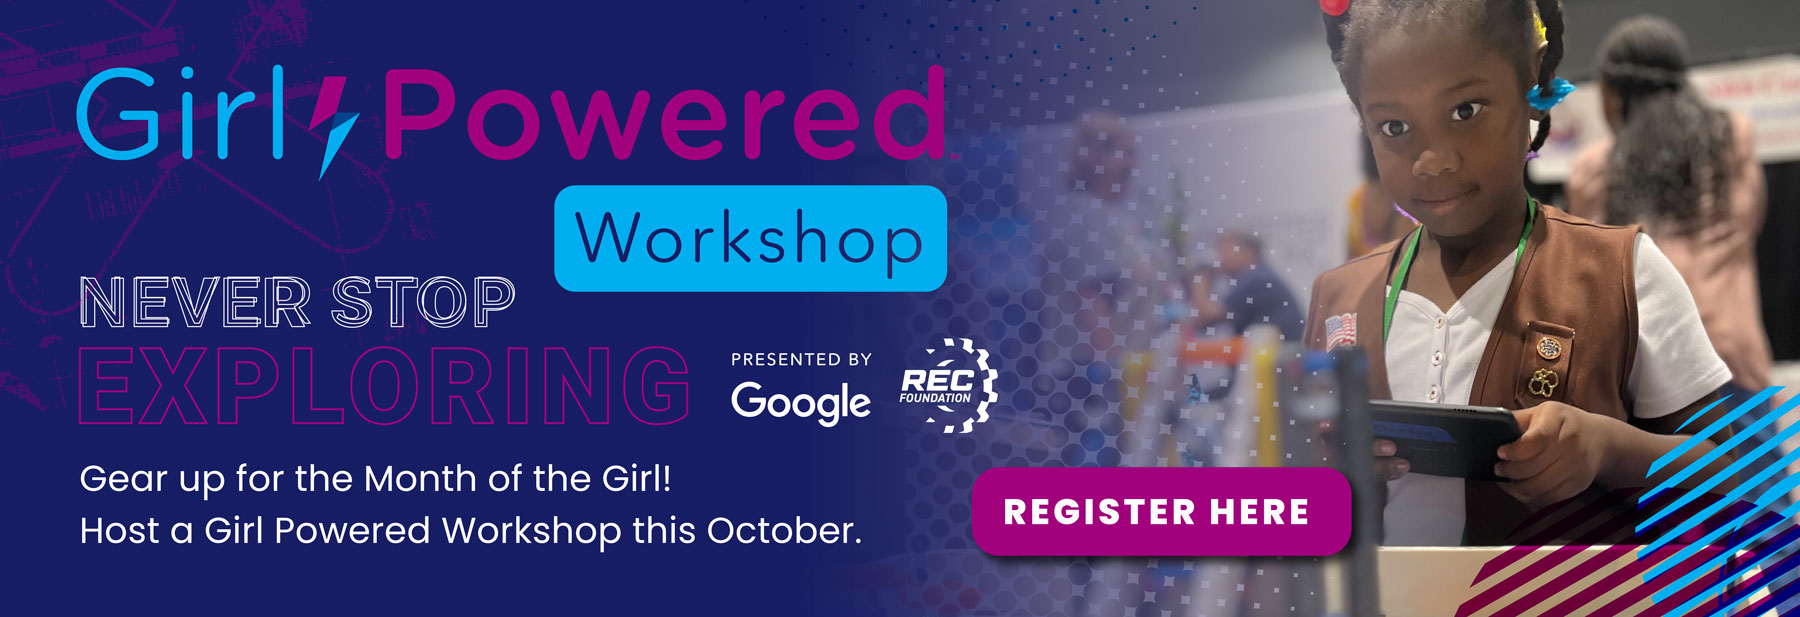 Gear up for the Month of the Girl! Host a Girl Powered Workshop this October.